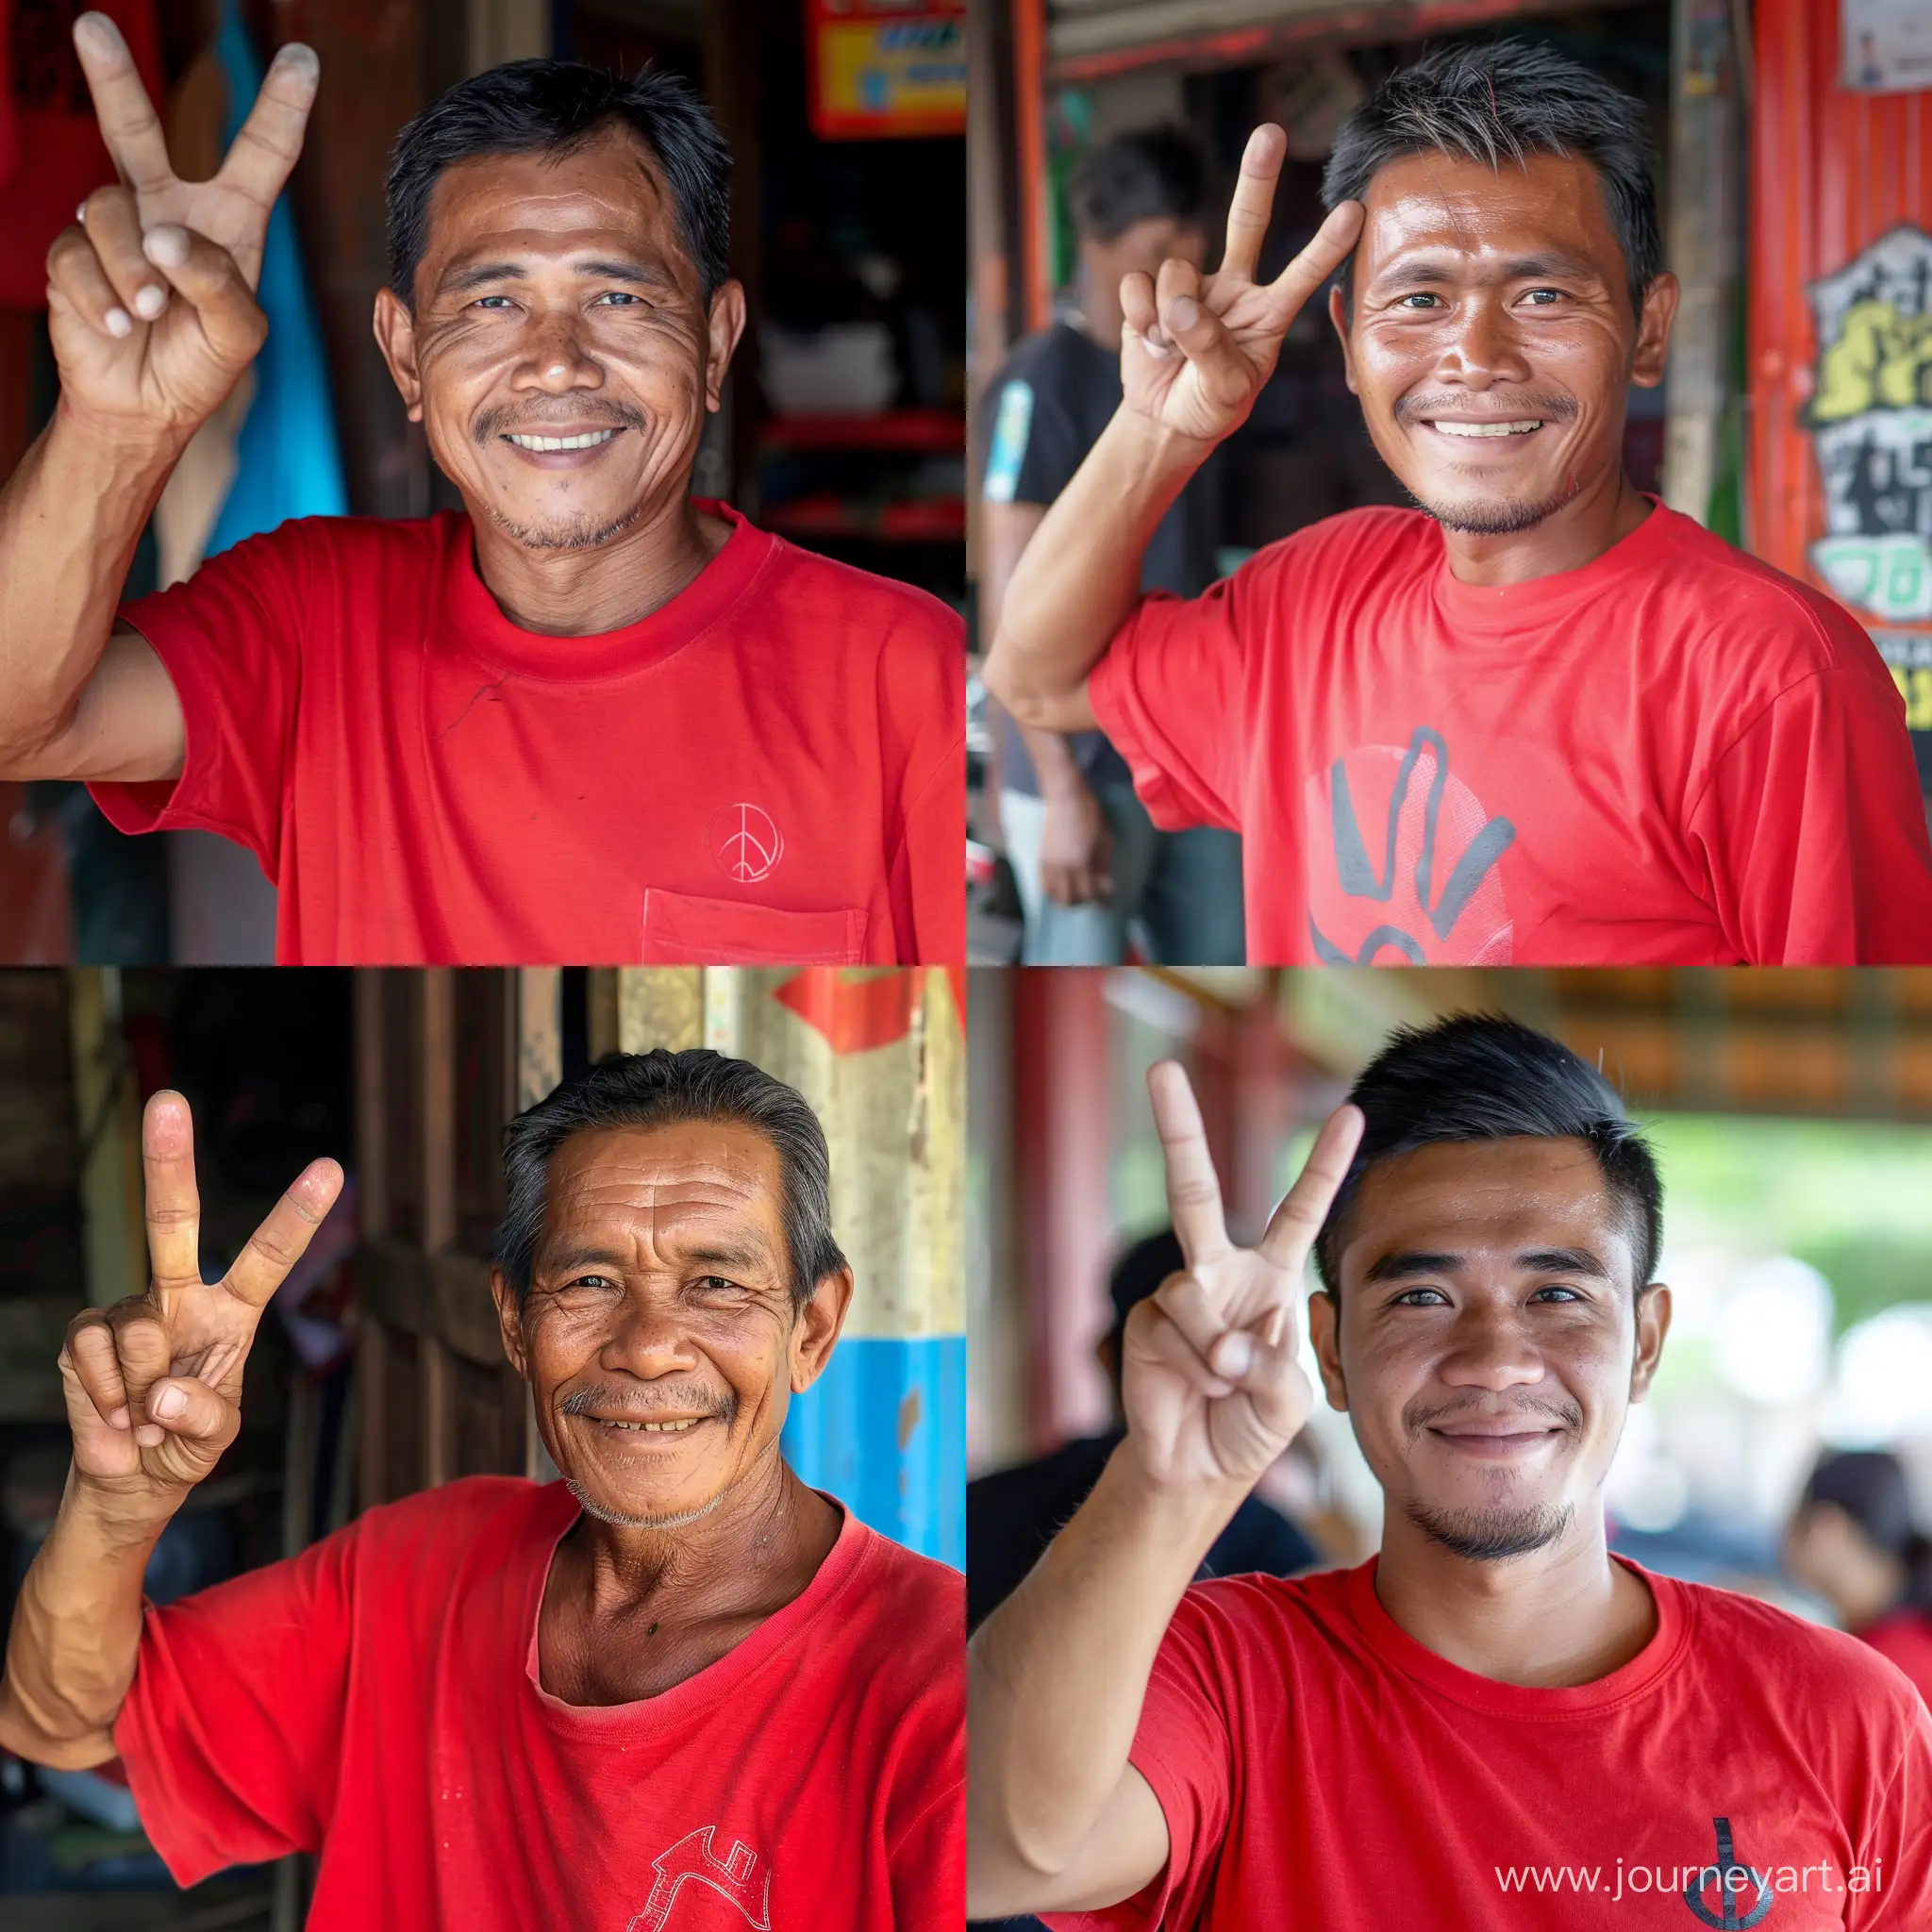 Smiling-Indonesian-Man-in-Red-Shirt-Making-Peace-Sign